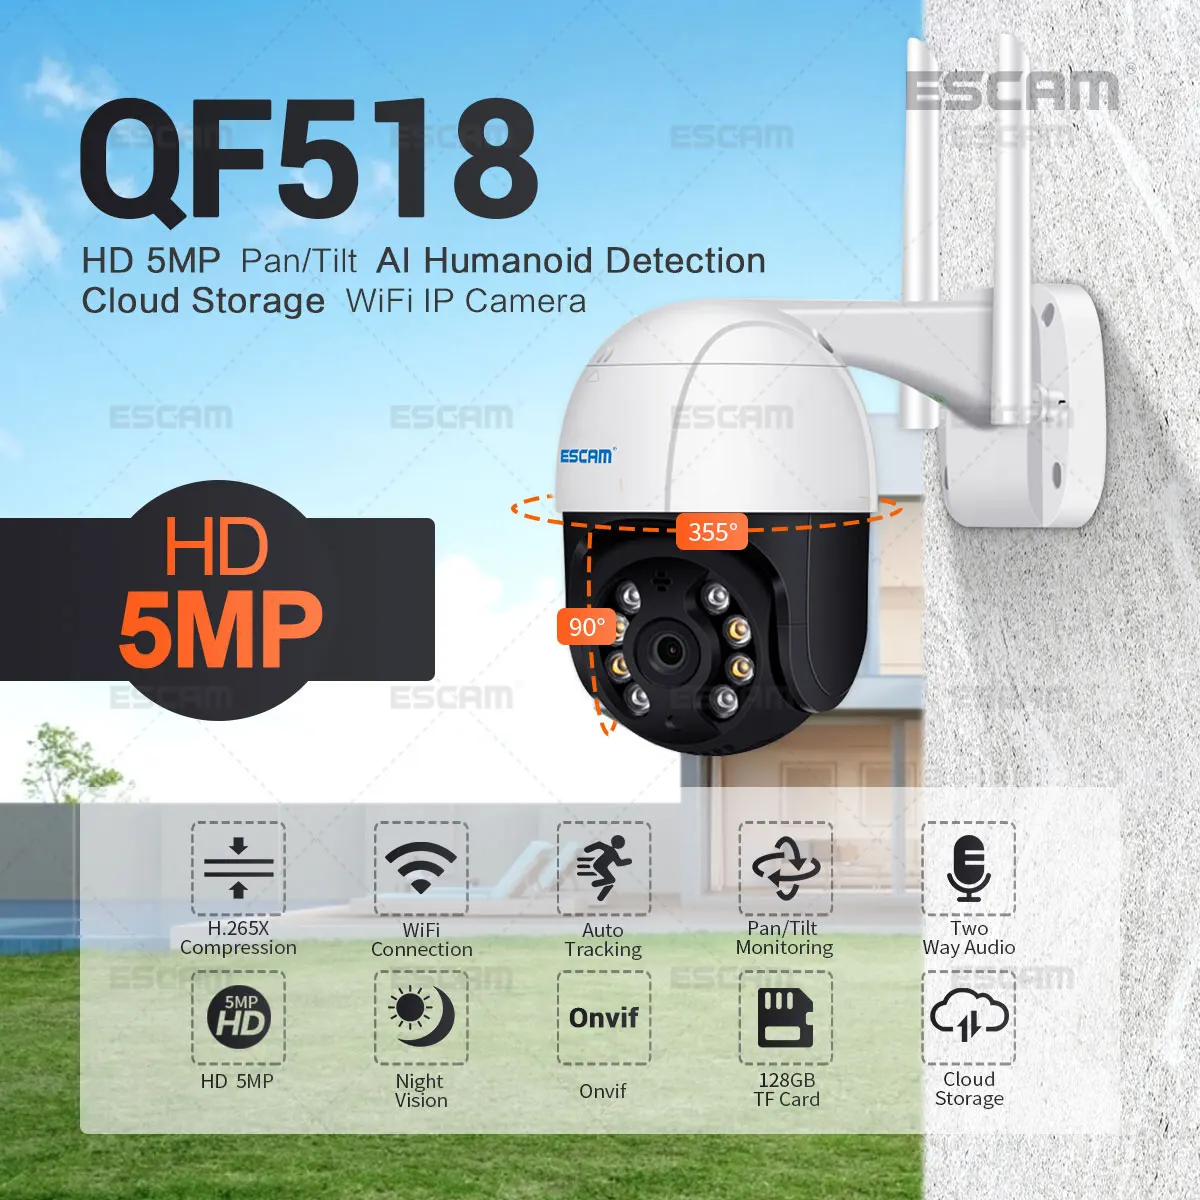 

ESCAM QF518 5MP Pan/Tilt AI Humanoid Detection Auto Tracking Cloud Storage WiFi IP Camera with Two Way Audio Night Vision